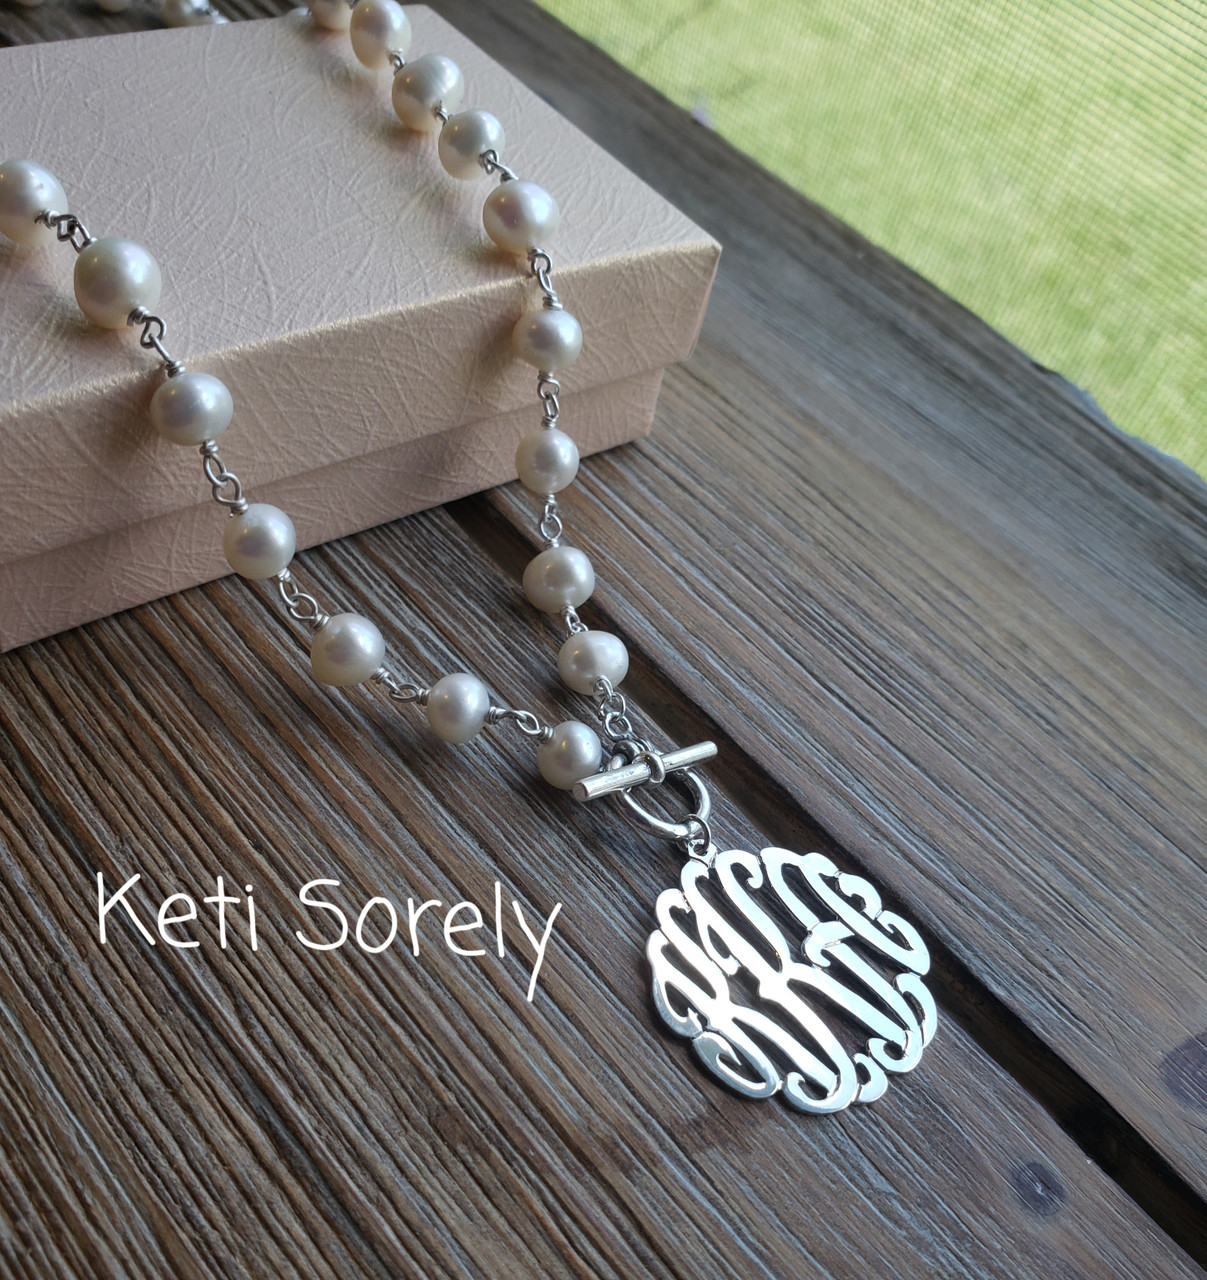 Handmade personalized Pearl Necklace with Monogram Initials charm and  toggle clasp - White freshwater pearls